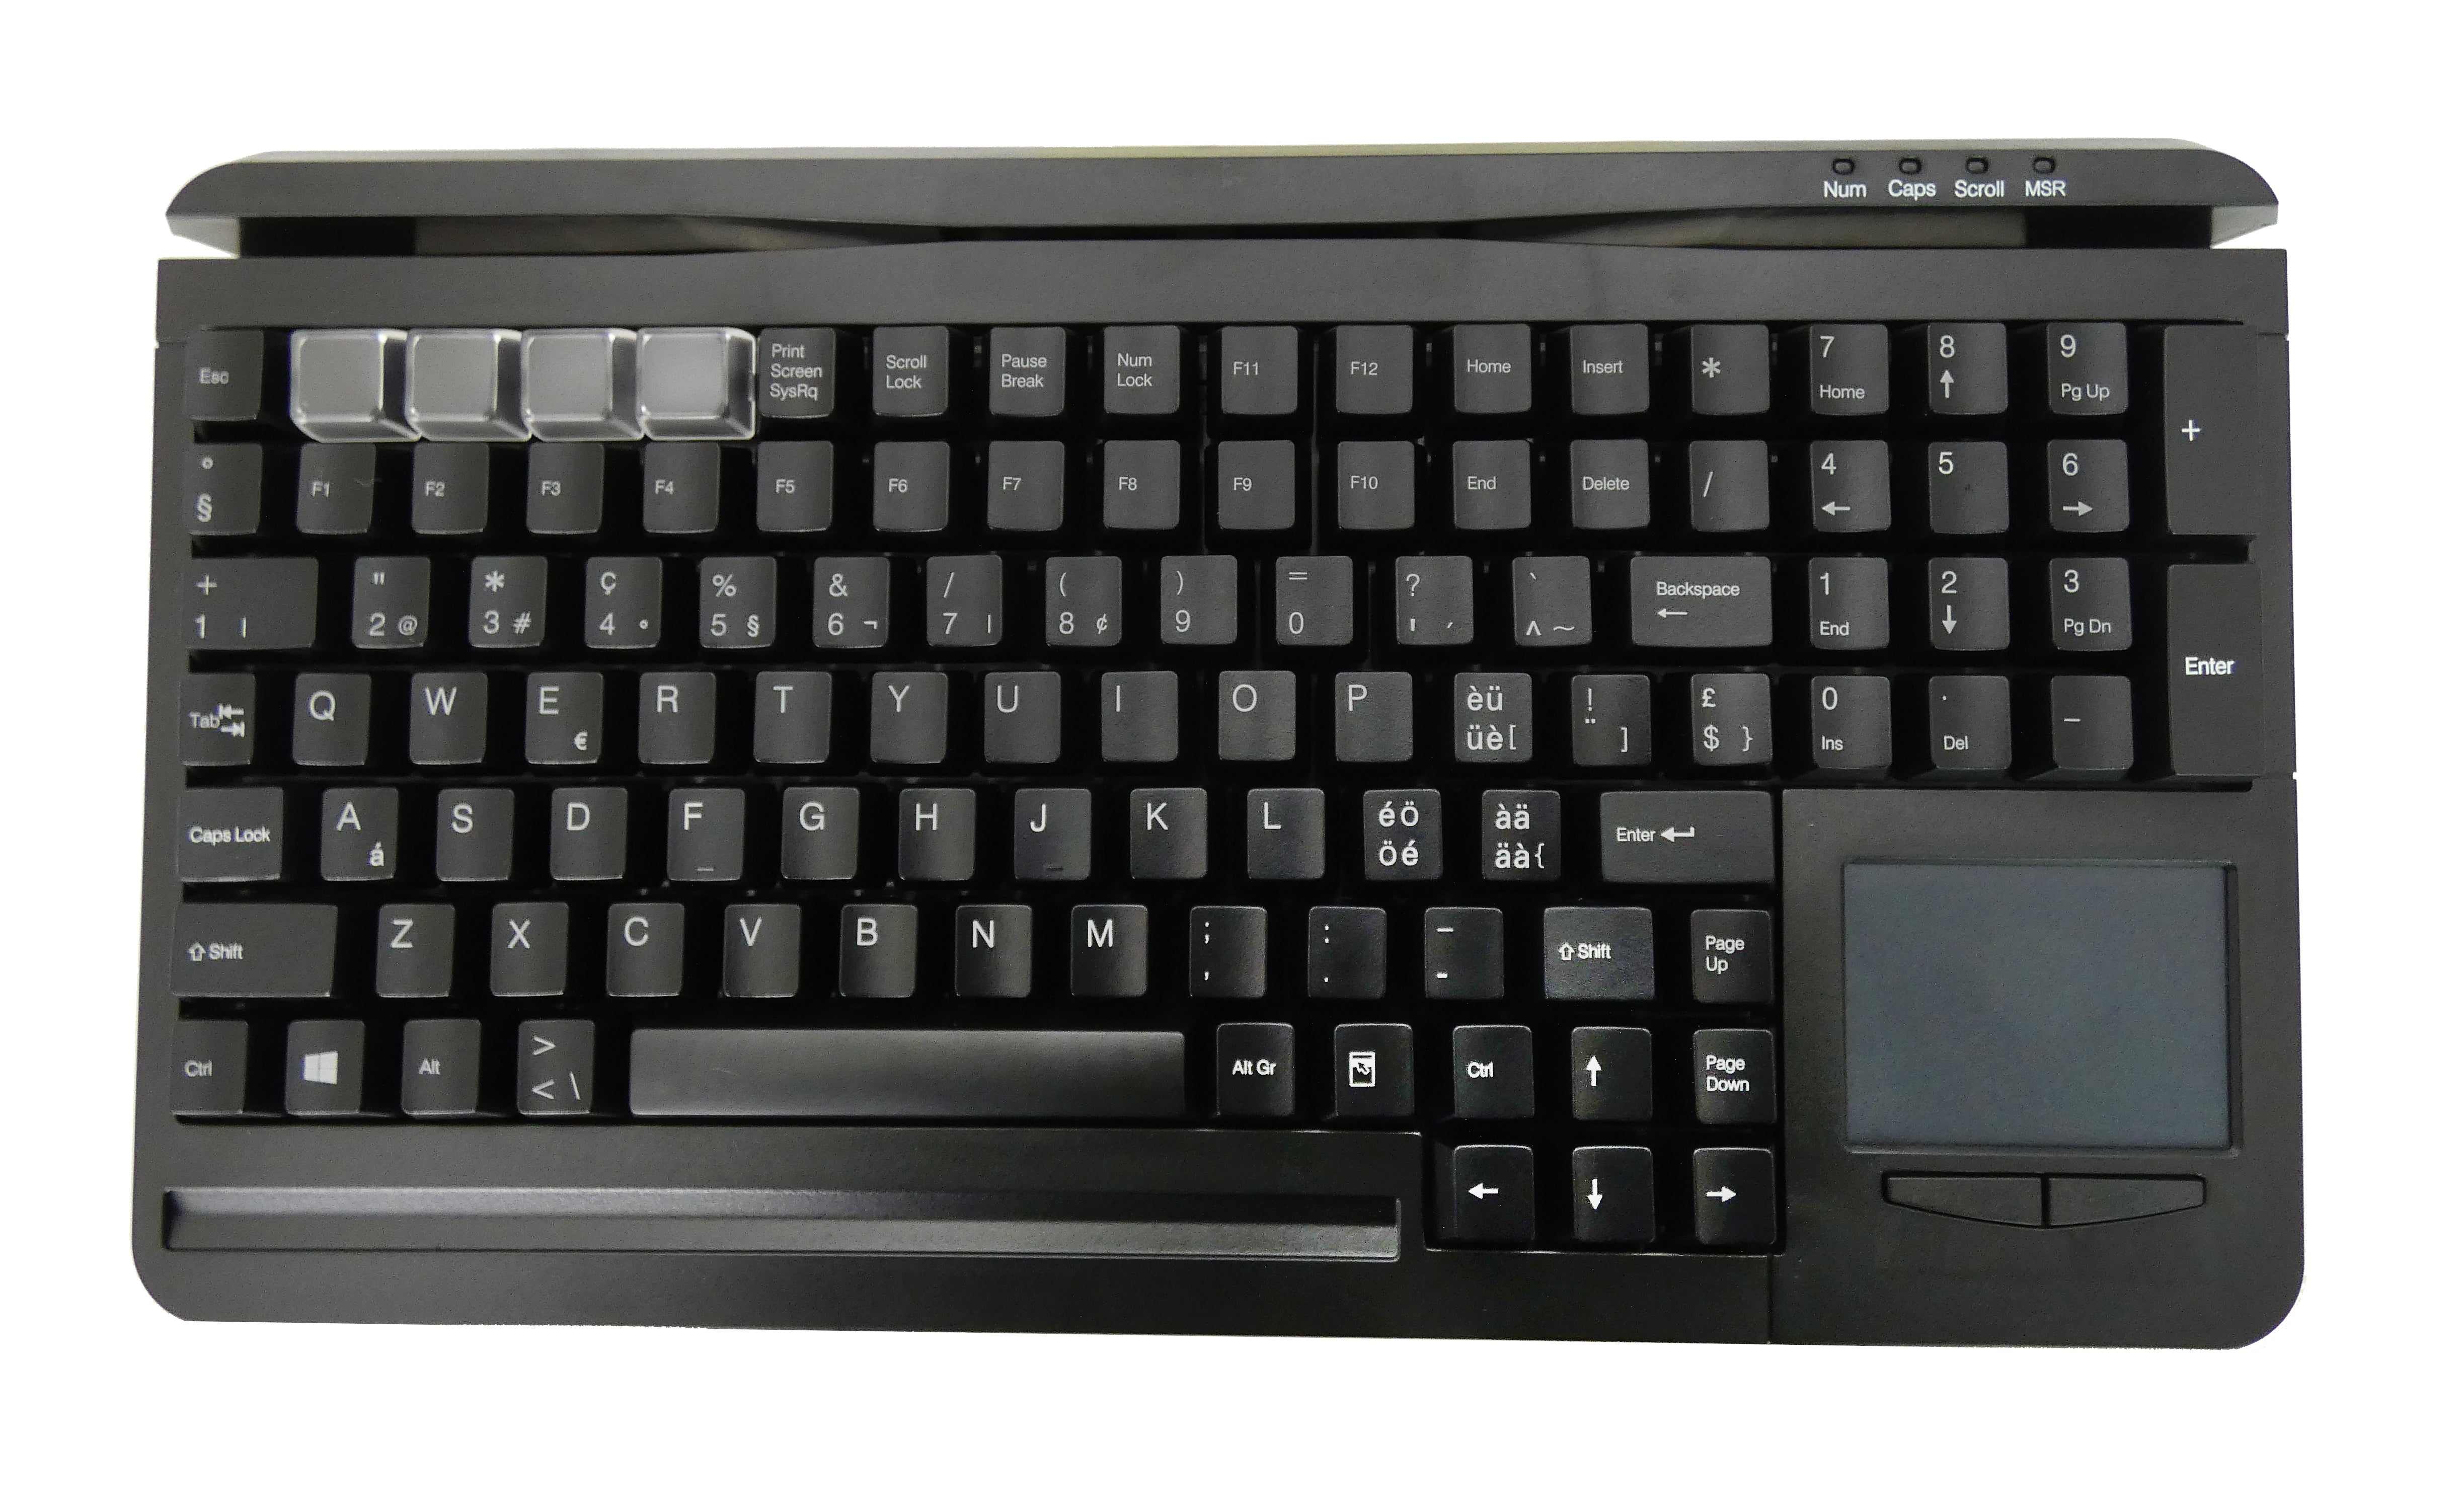 Accuratus S109P - PS2 Compact QWERTY & Programmable POS 109 Key Keyboard with MSR and Touchpad